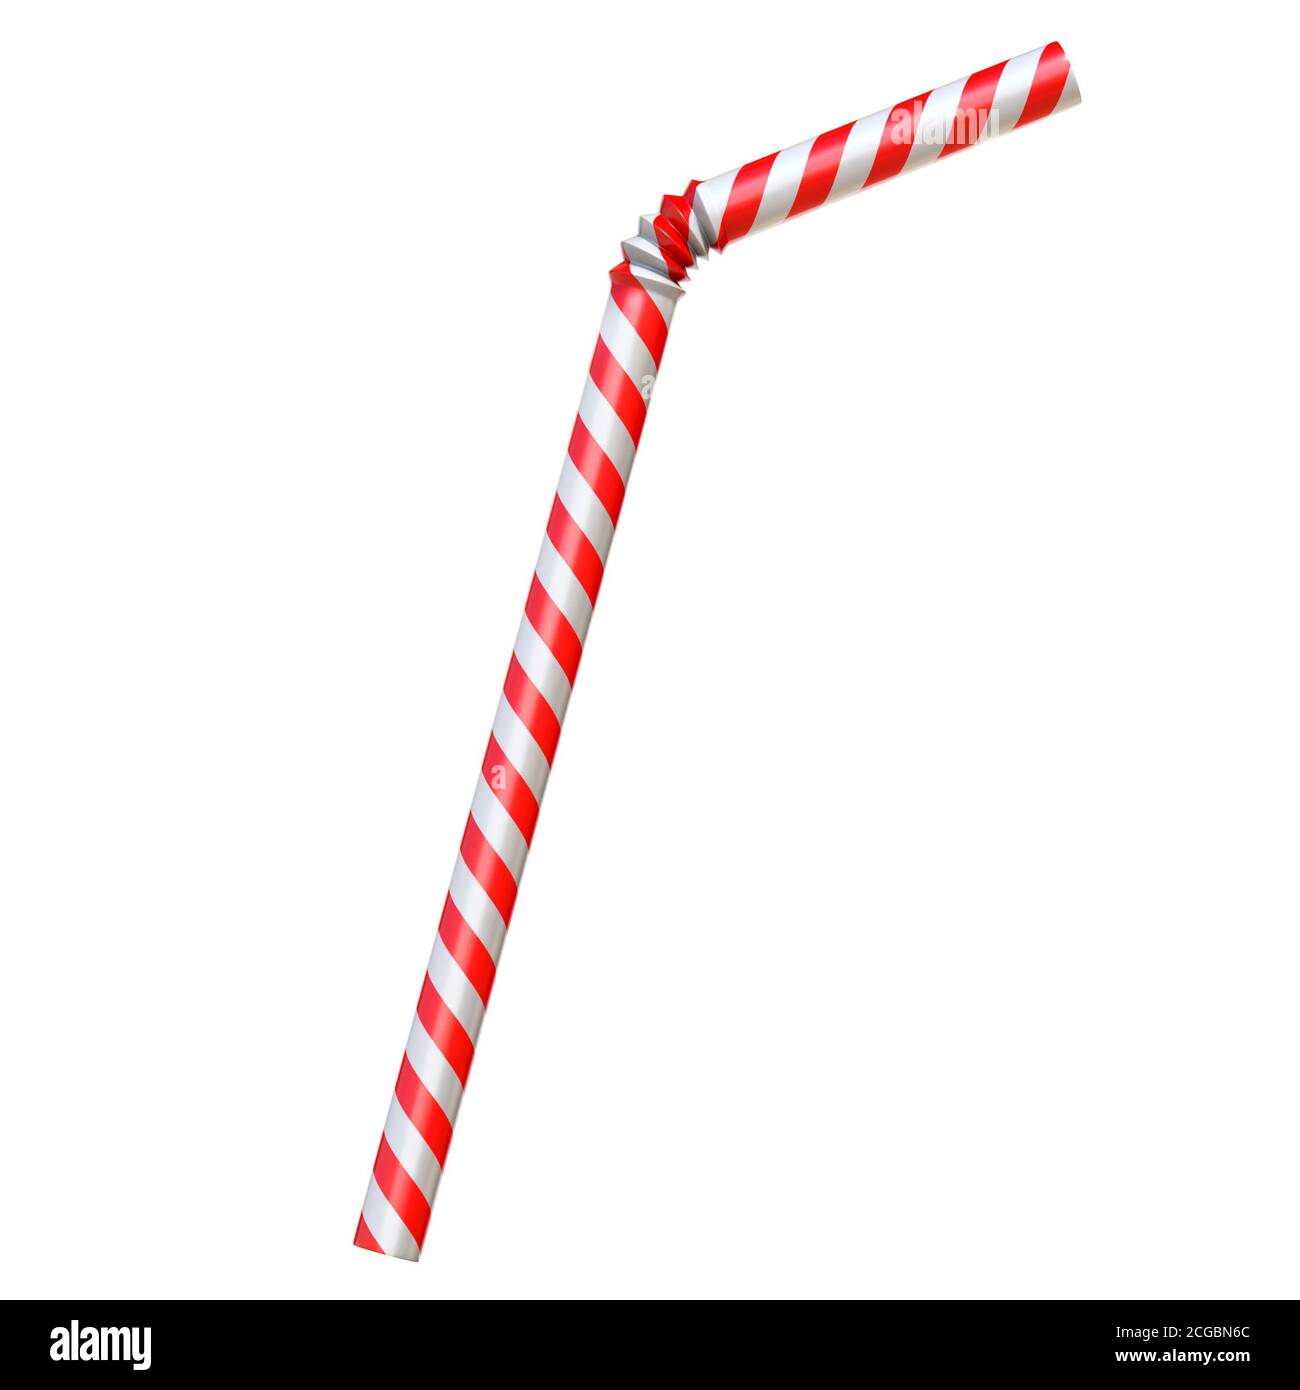 Drinking straw isolated on white 3d rendering Stock Photo